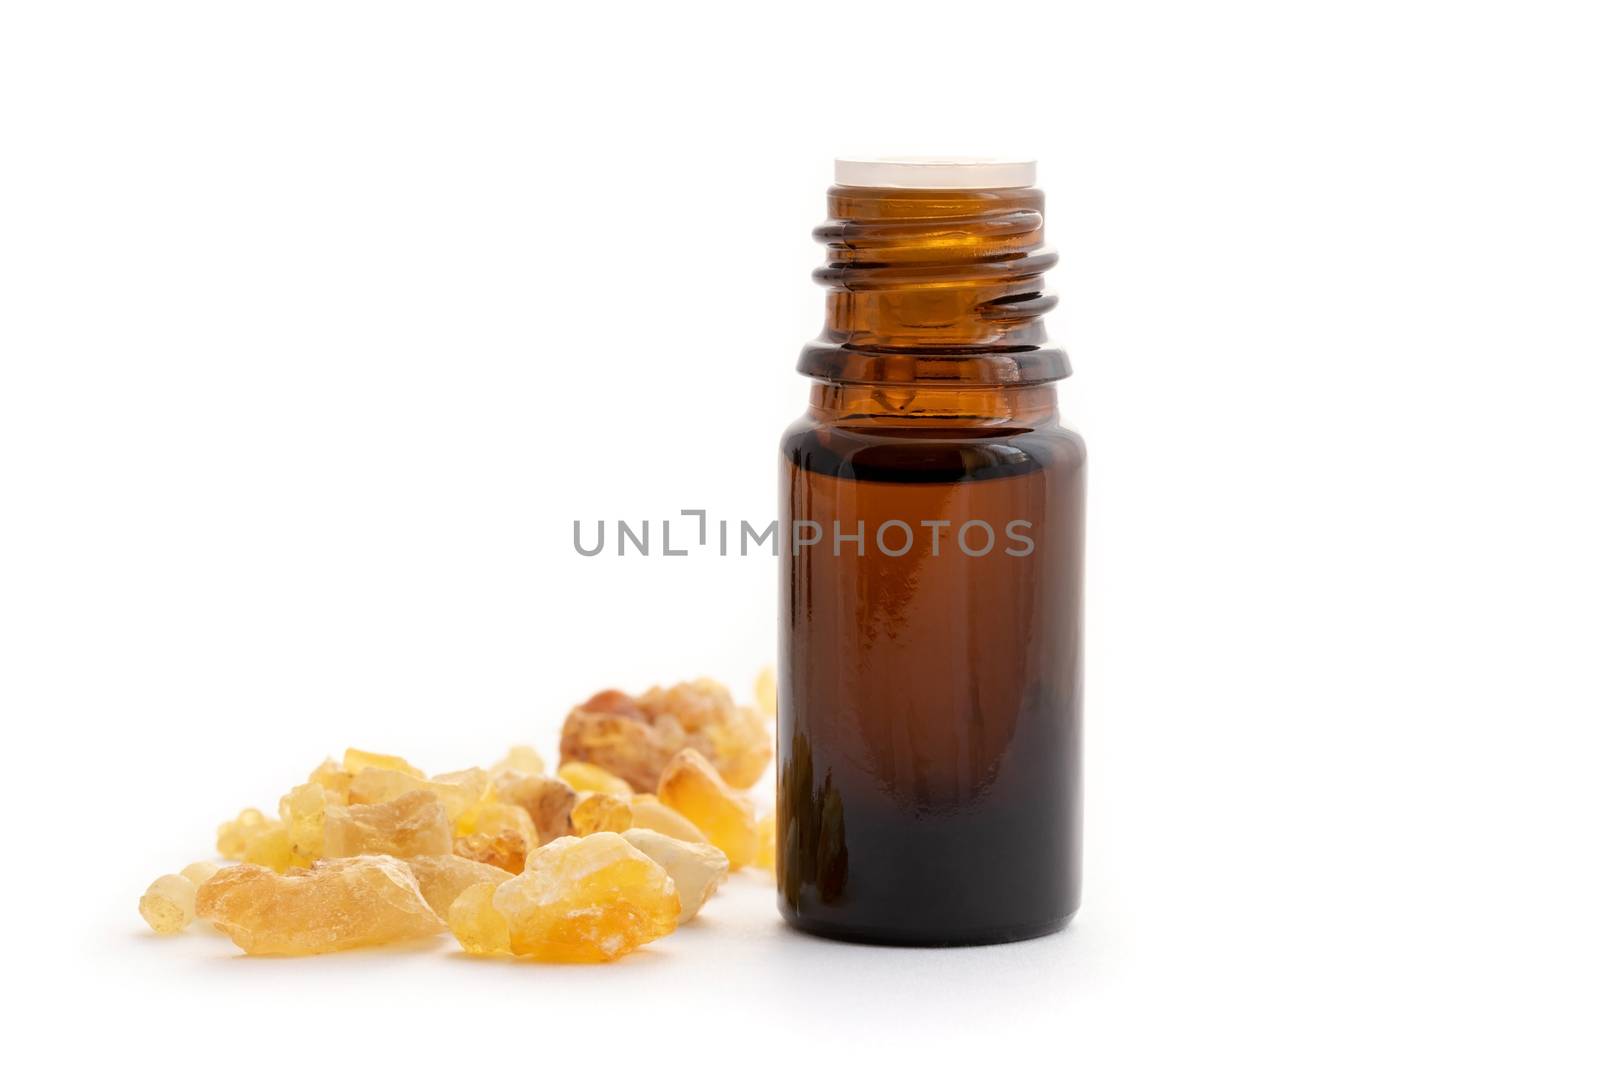 A bottle of essential oil with frankincense resin on a white background